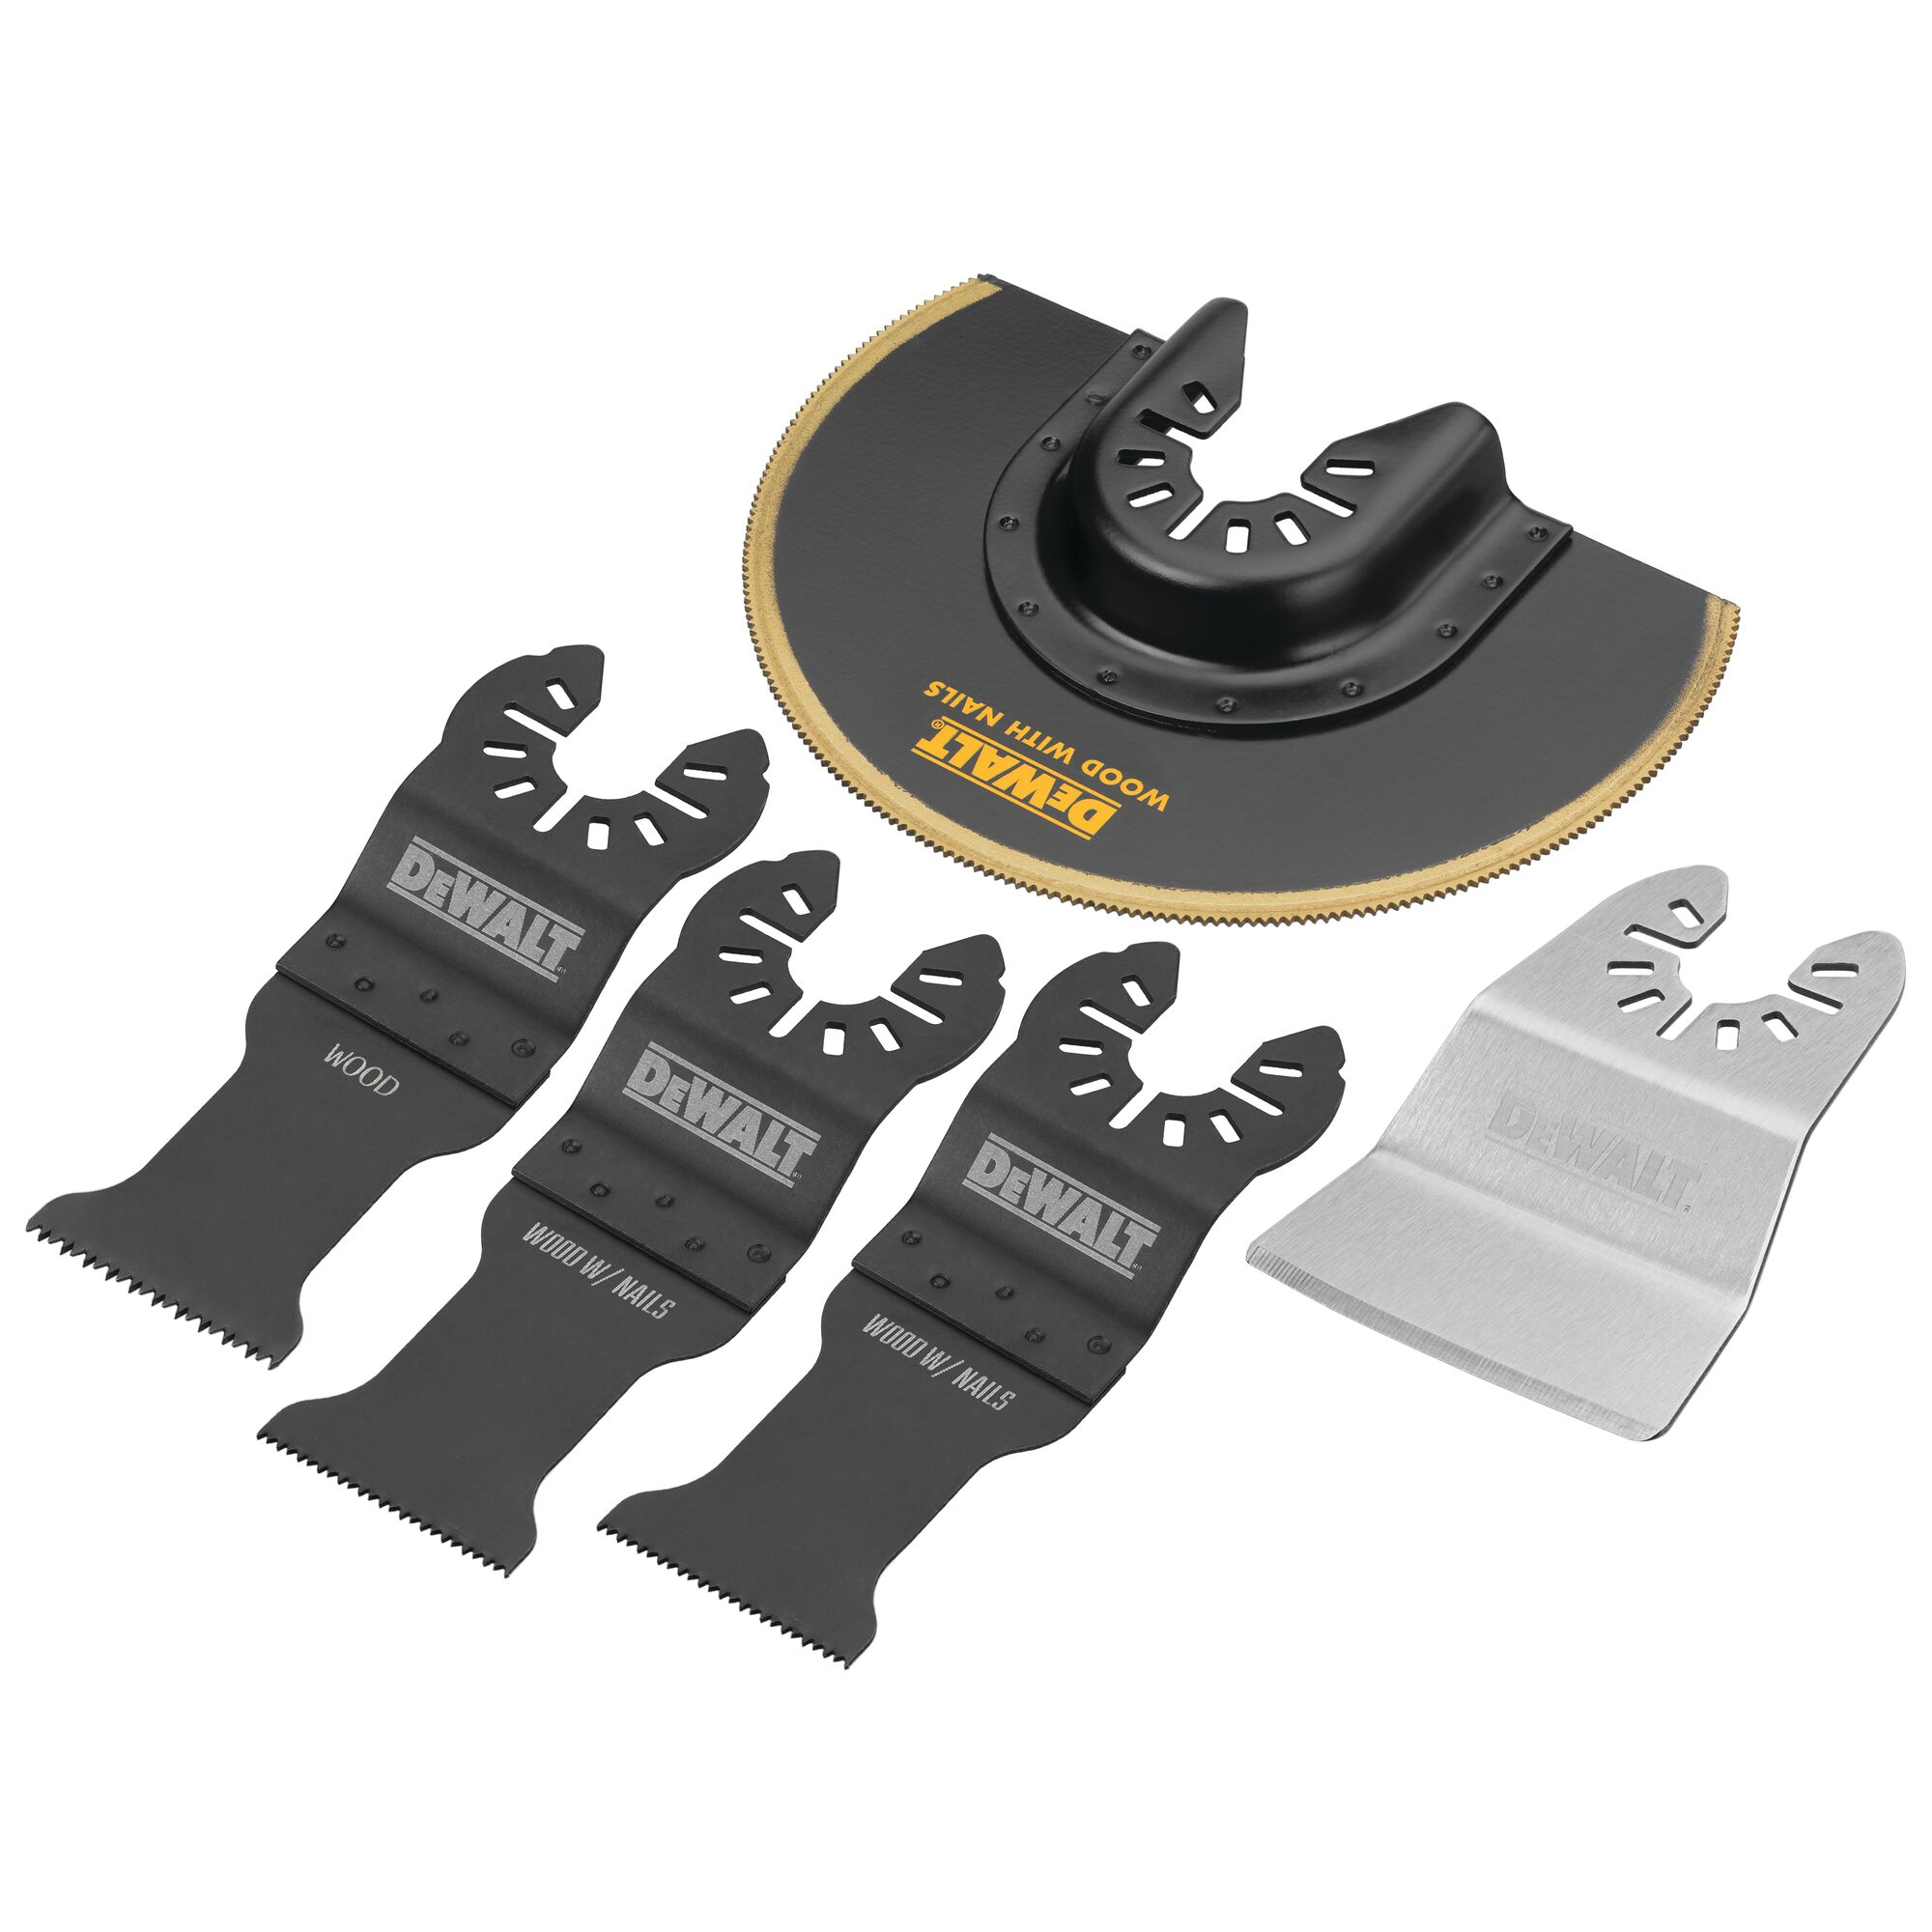 Dremel MM388 13-Piece Oscillating Multi-Tool Accessory Kit, Includes 4  Blades, 9 Wood Sandpaper Sheets, and Storage Case - Universal Quick- Fit  Interface fits Bosch, Makita, Milwaukee, and Rockwell - Power Oscillating  Tool